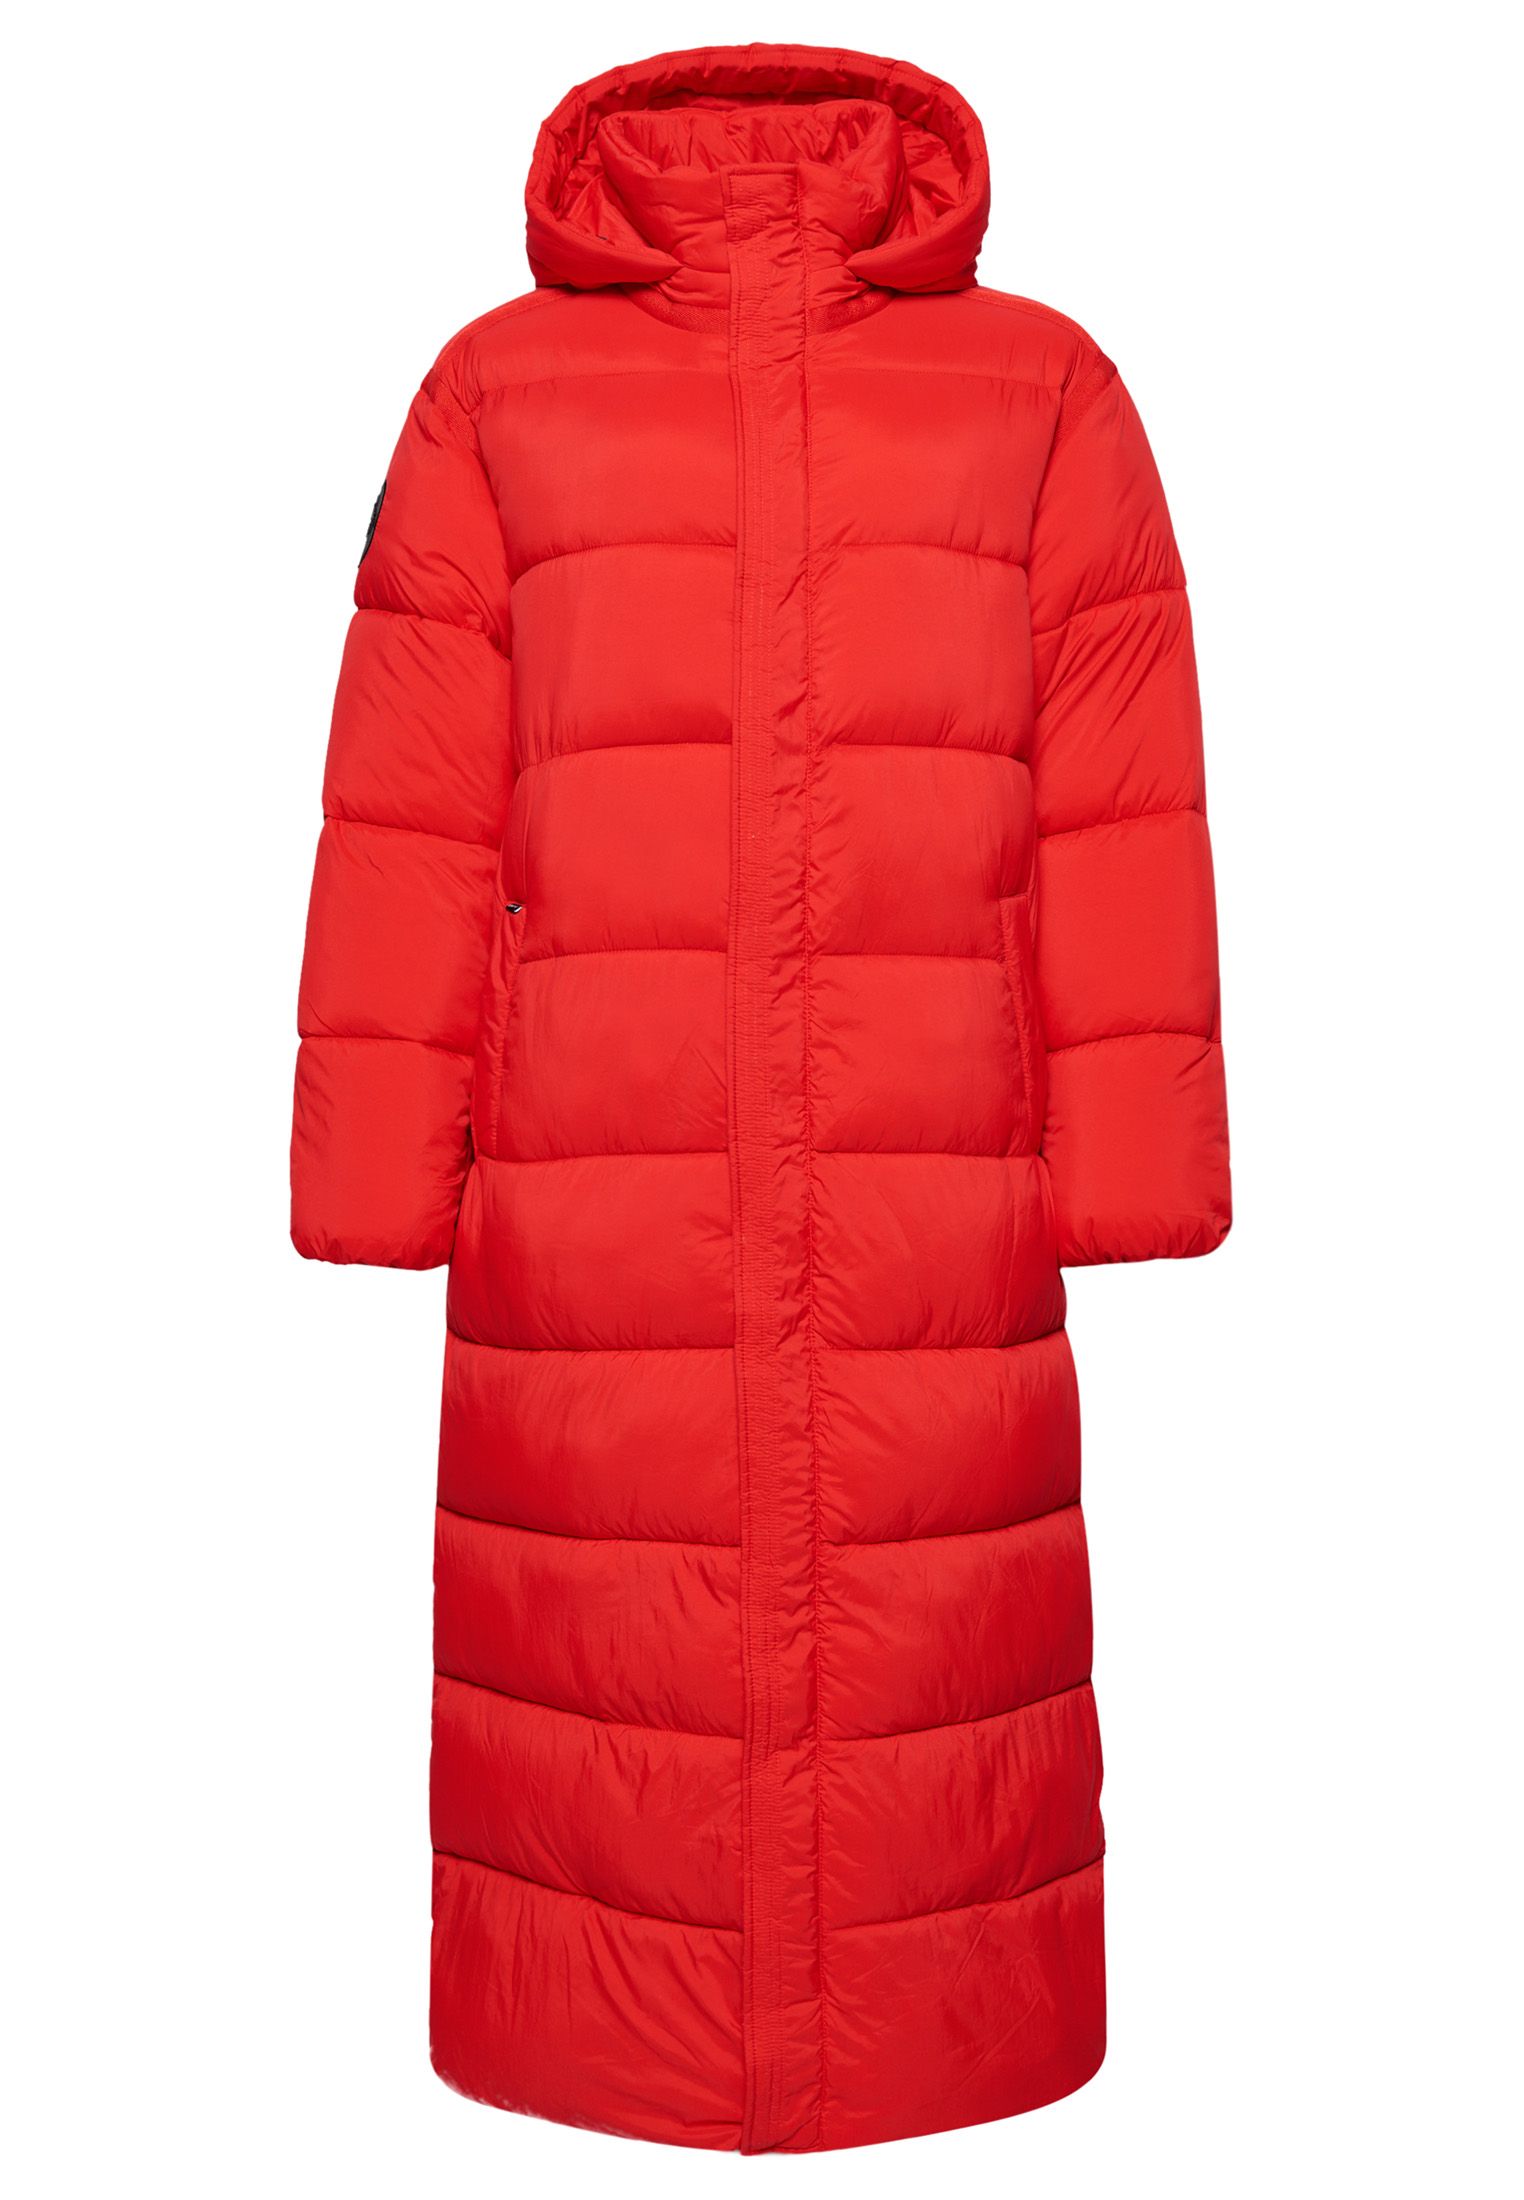 When it comes to layering up for the cold, it's essential to meet fashion with functionality. The Cocoon Longline Puffer Coat embraces that combination of comfort and chic, bringing you a luxuriously soft layer that's perfect for those cold outdoor days. Its cosy quality is concealing to keep the elements out whilst ensuring your movement is unimpeded thanks to its light but strategically placed padding. We've taken care to ensure this coat is a practical, non-intrusive way to stay warm that complements your personal style with the subtle style it brings, making it an essential pick for any outdoor situation,Relaxed fit – the classic Superdry fit. Not too slim, not too loose, just right. Go for your normal sizeUK10 shoulder to hem: 128cmLined hood with bungee cord adjustmentTwo-way zip and popper fasteningElasticated cuffsTwo front popper pocketsEmbroidered badge on the right sleeveFully linedInternal mesh pocketSignature Superdry tabThe padding in this jacket is 100% recycled, each jacket contains over 30 recycled bottles, this avoids these bottles being sent to landfill or polluting our oceans.